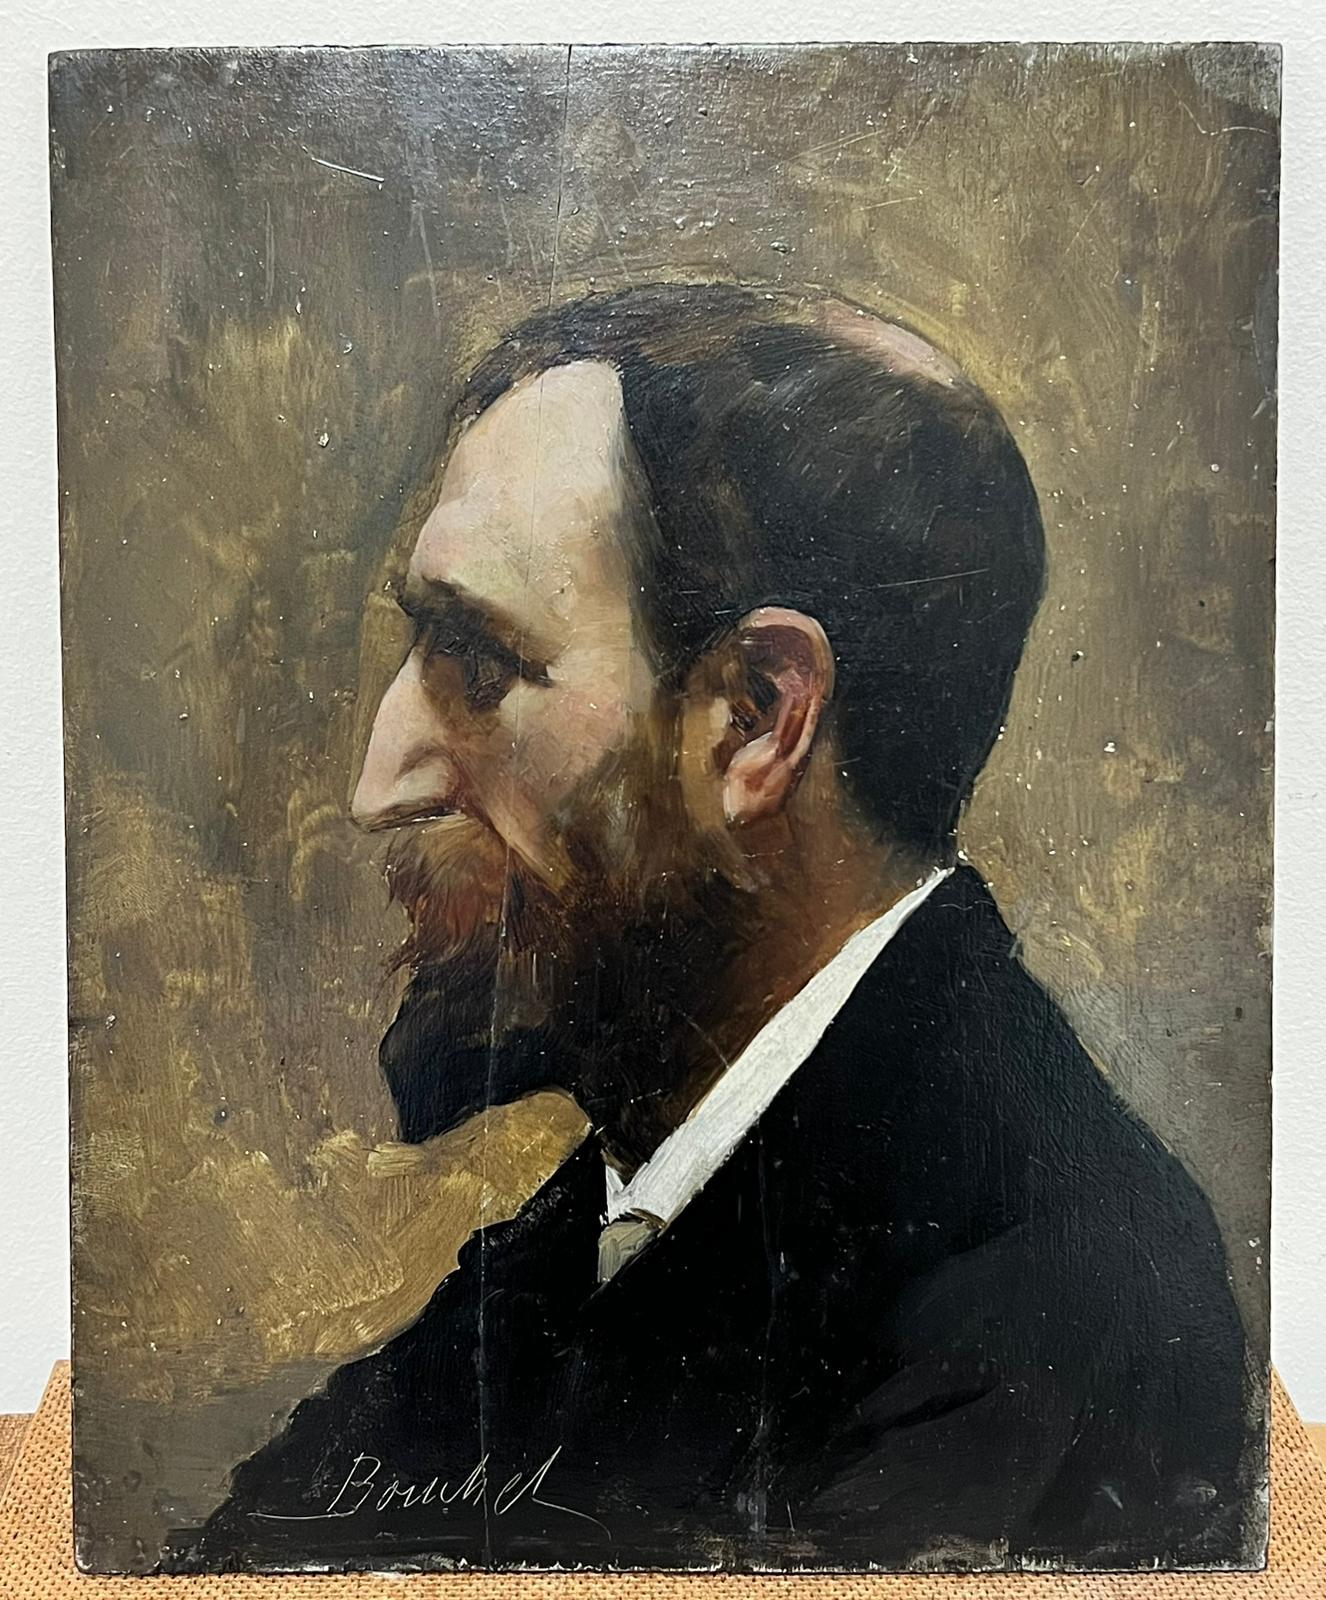 Artist/ School: signed French School, Bouchet (19th-20th Century)

Title: Portrait of a bearded man

Medium: oil on board

Size: 11 x 8.5 inches

Provenance: private collection, France

Condition: The painting is in overall very good and sound